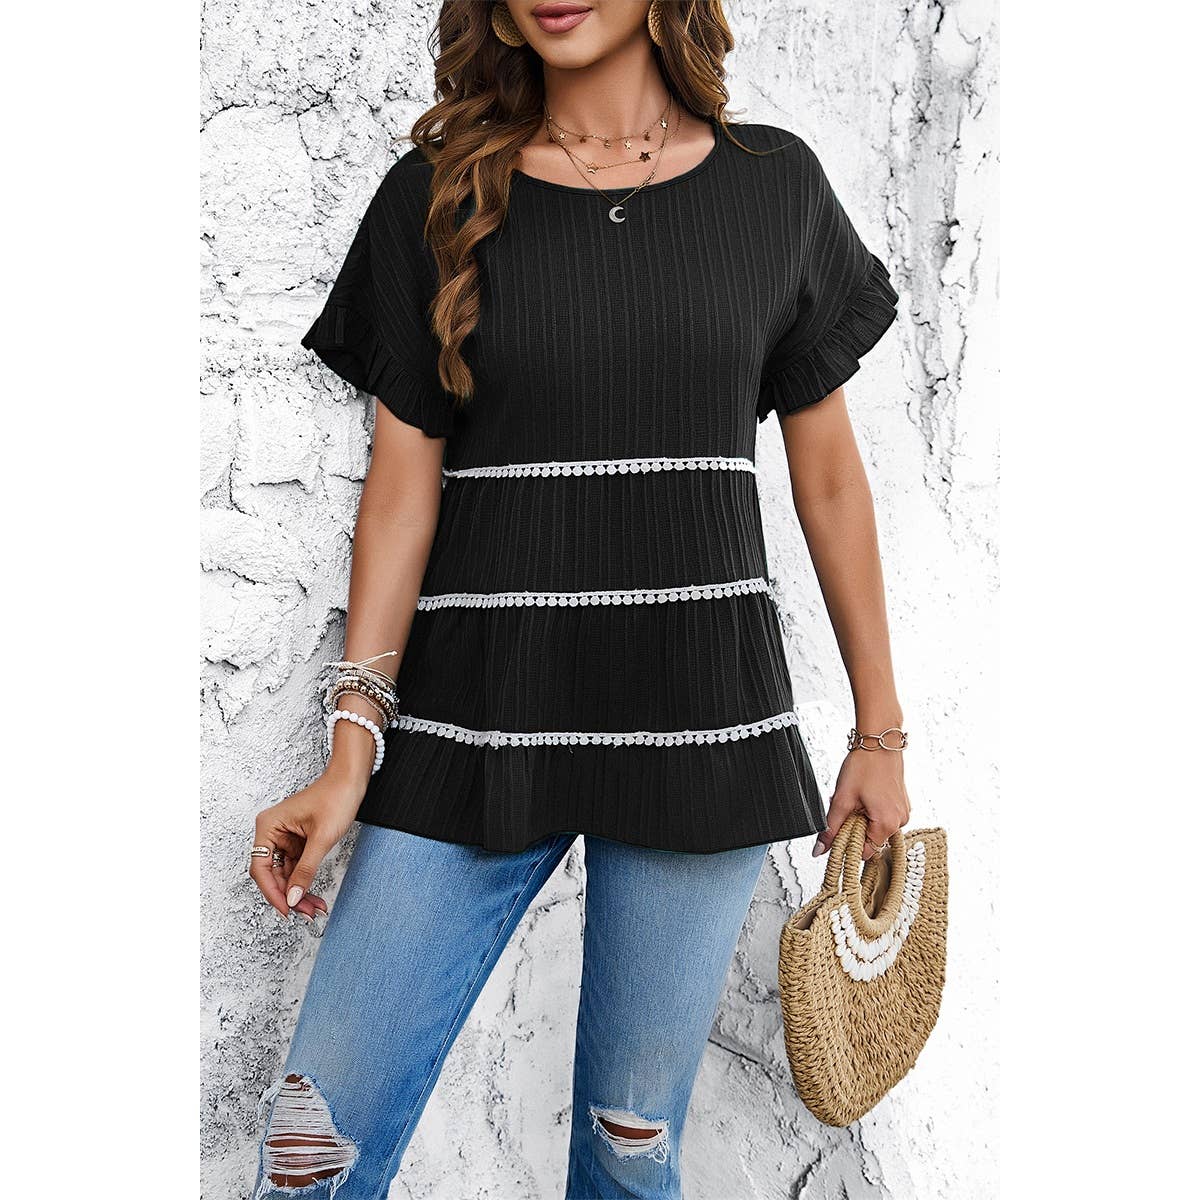 Solid Color Block Ruched Ruffle Loose Fit Top - MVTFASHION.COM